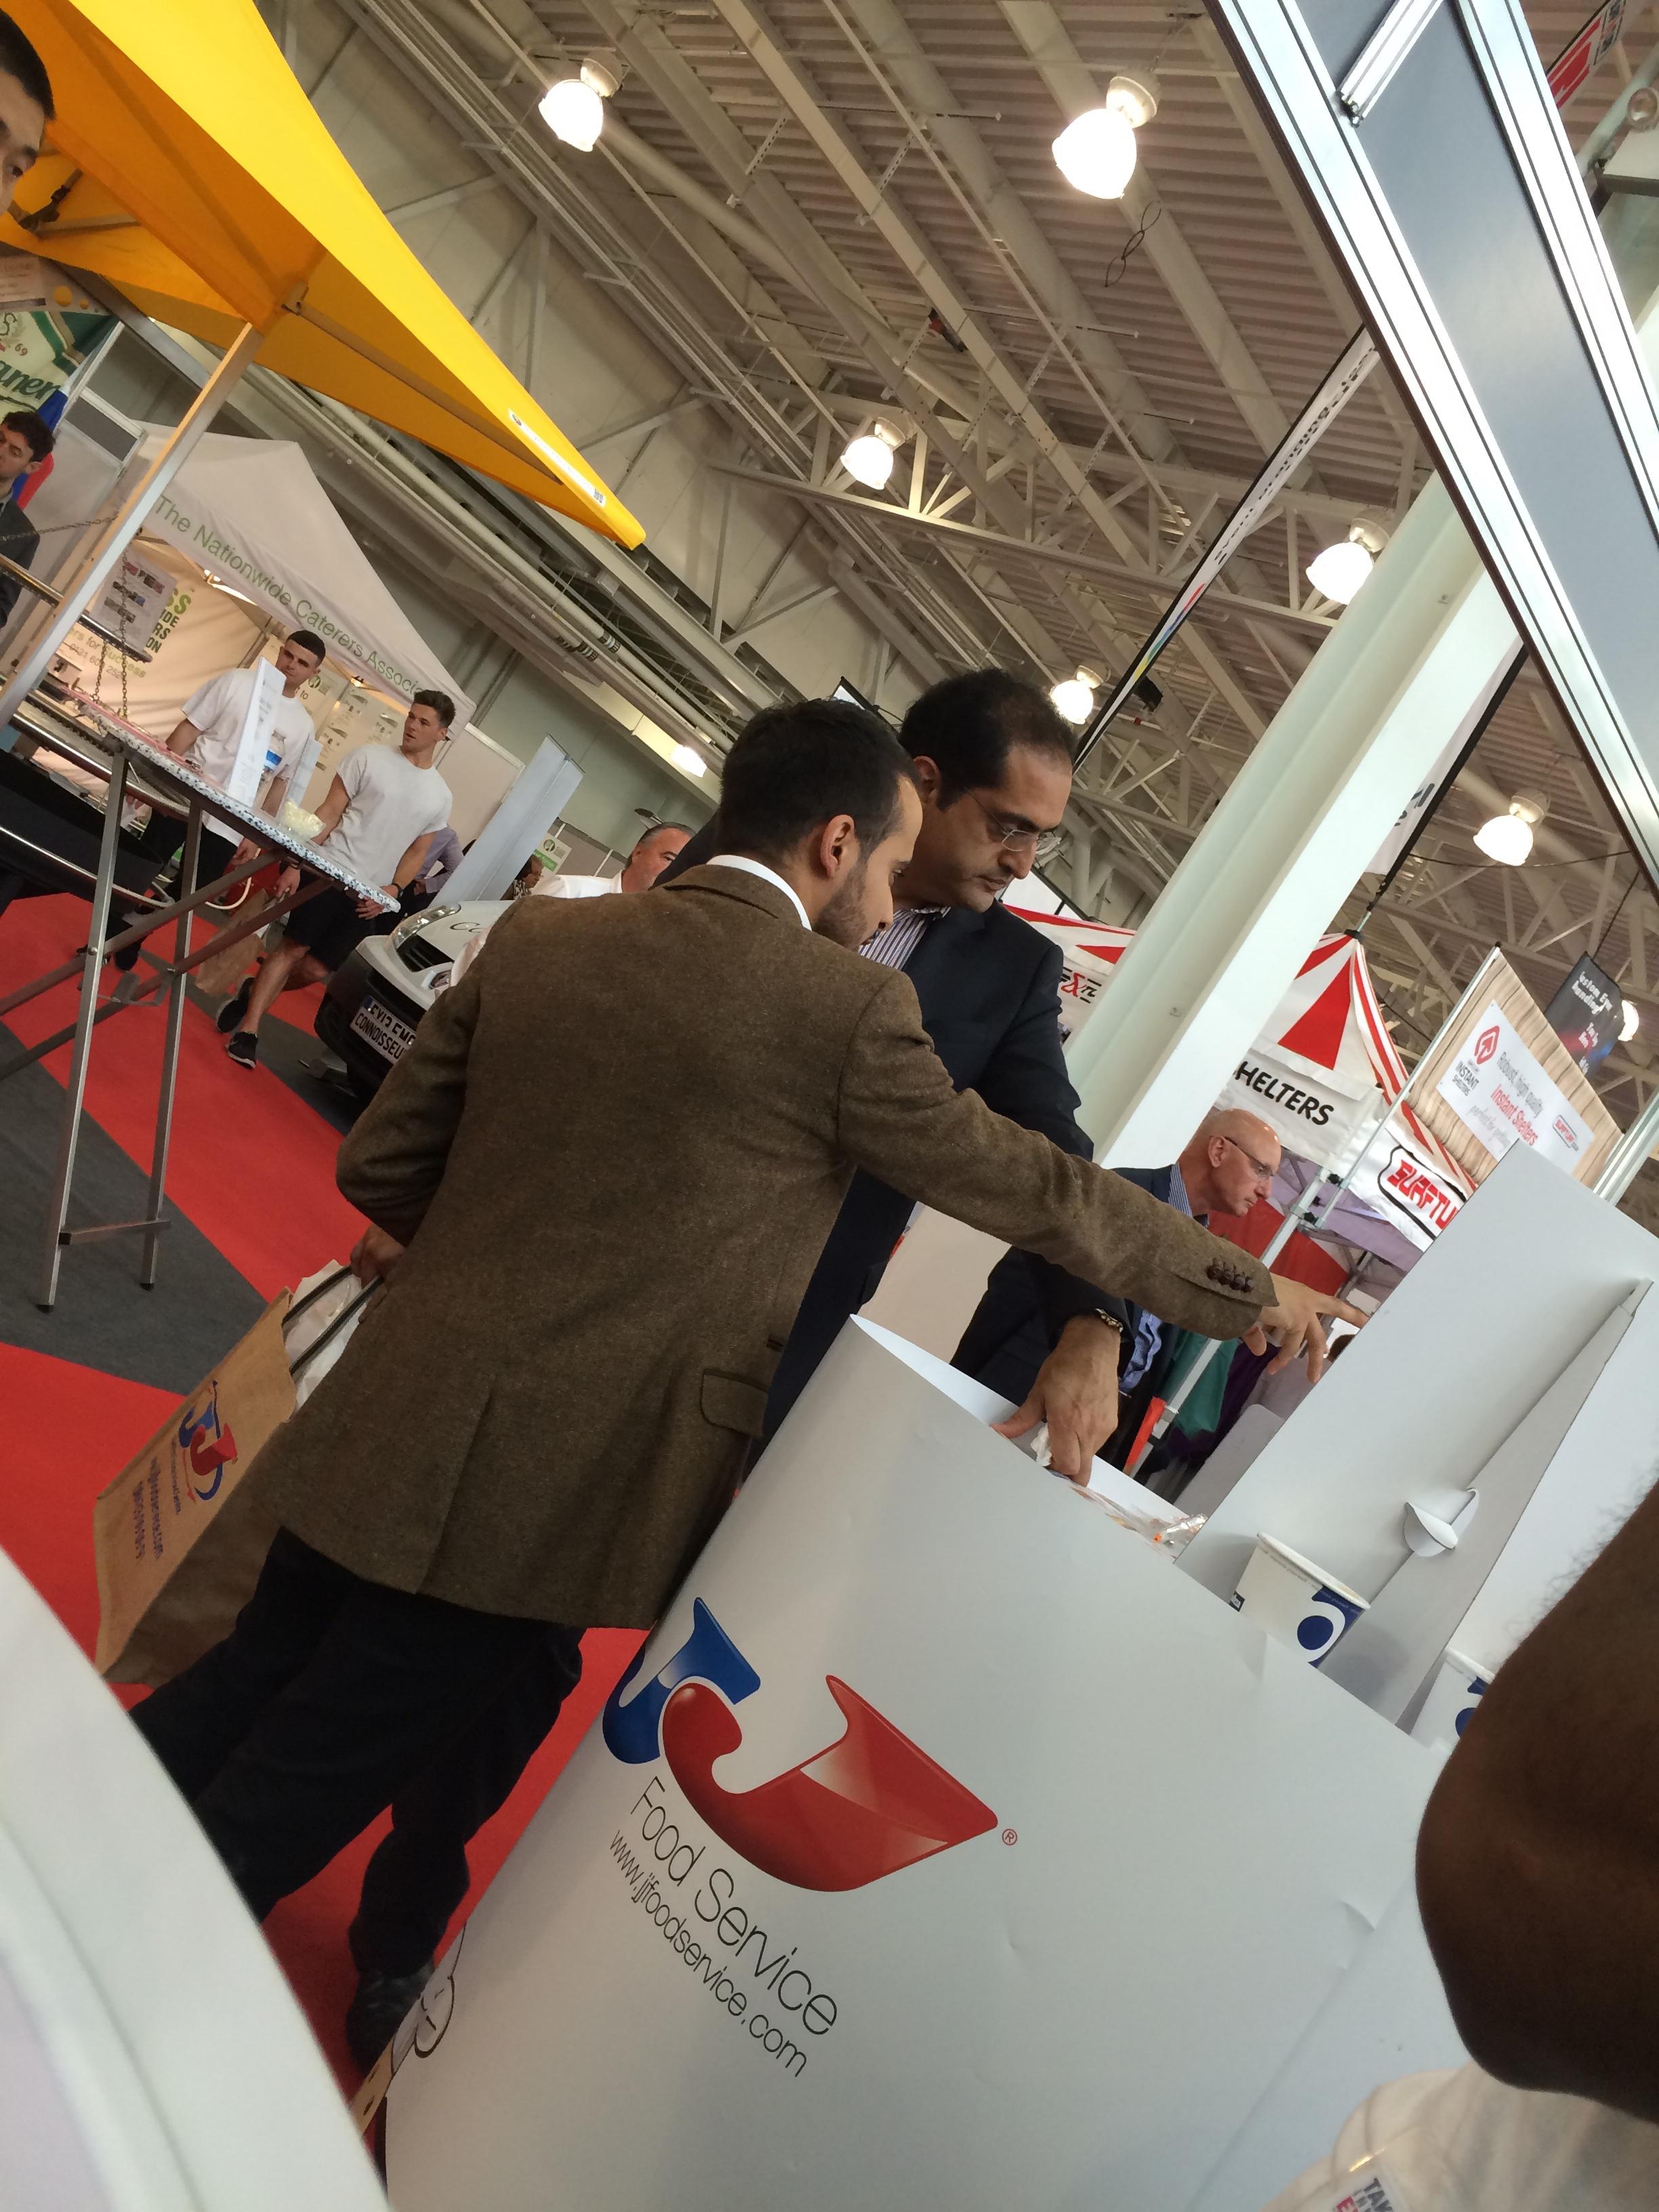 TakeAwayExpo2014 - Collaborating with our visitors